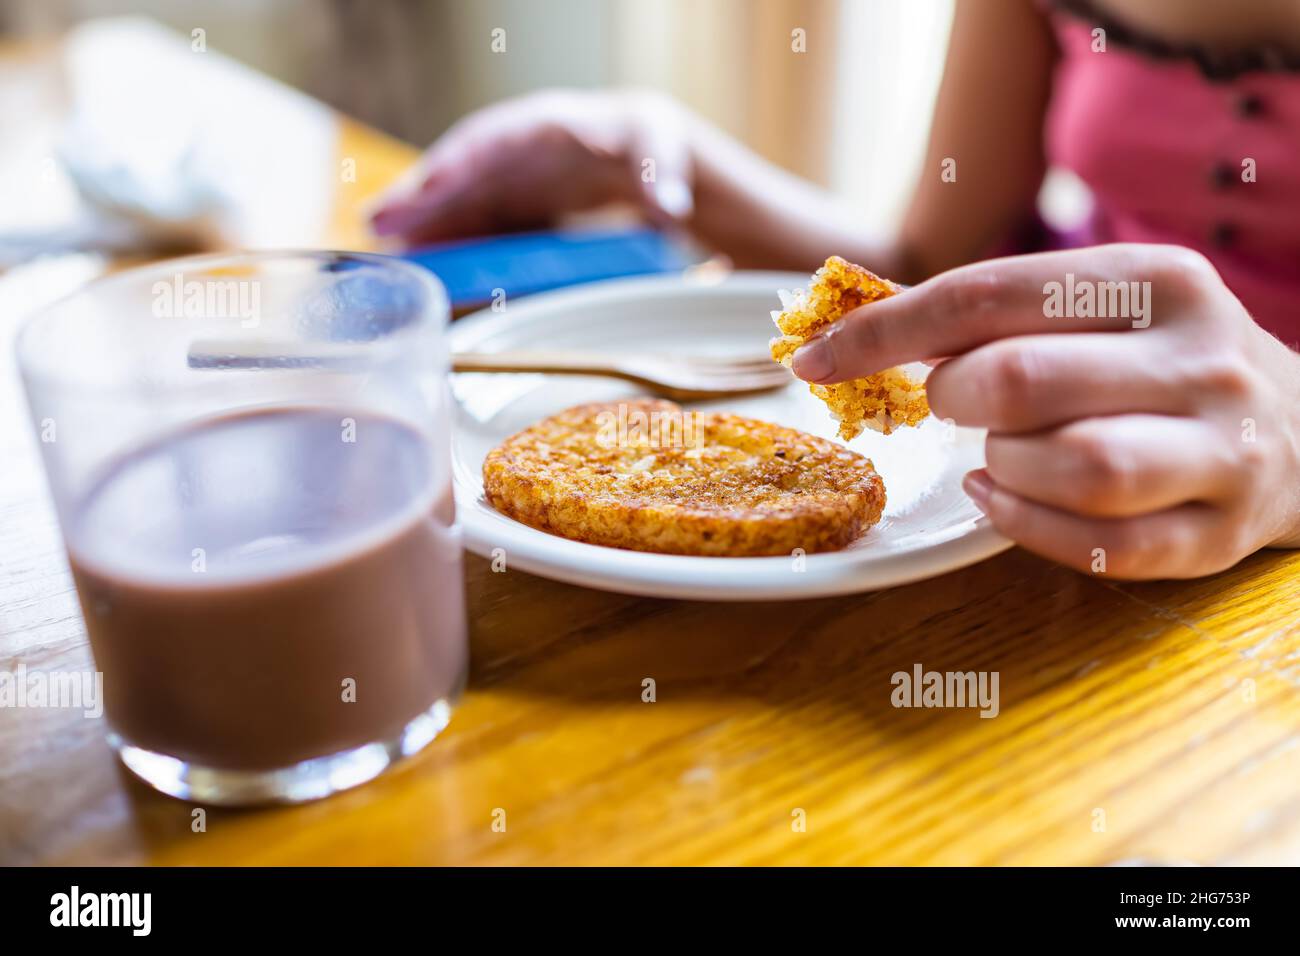 Macro closeup of woman sitting at breakfast table holding eating potato fried hash browns with hand on plate by glass of chocolate milk and background Stock Photo